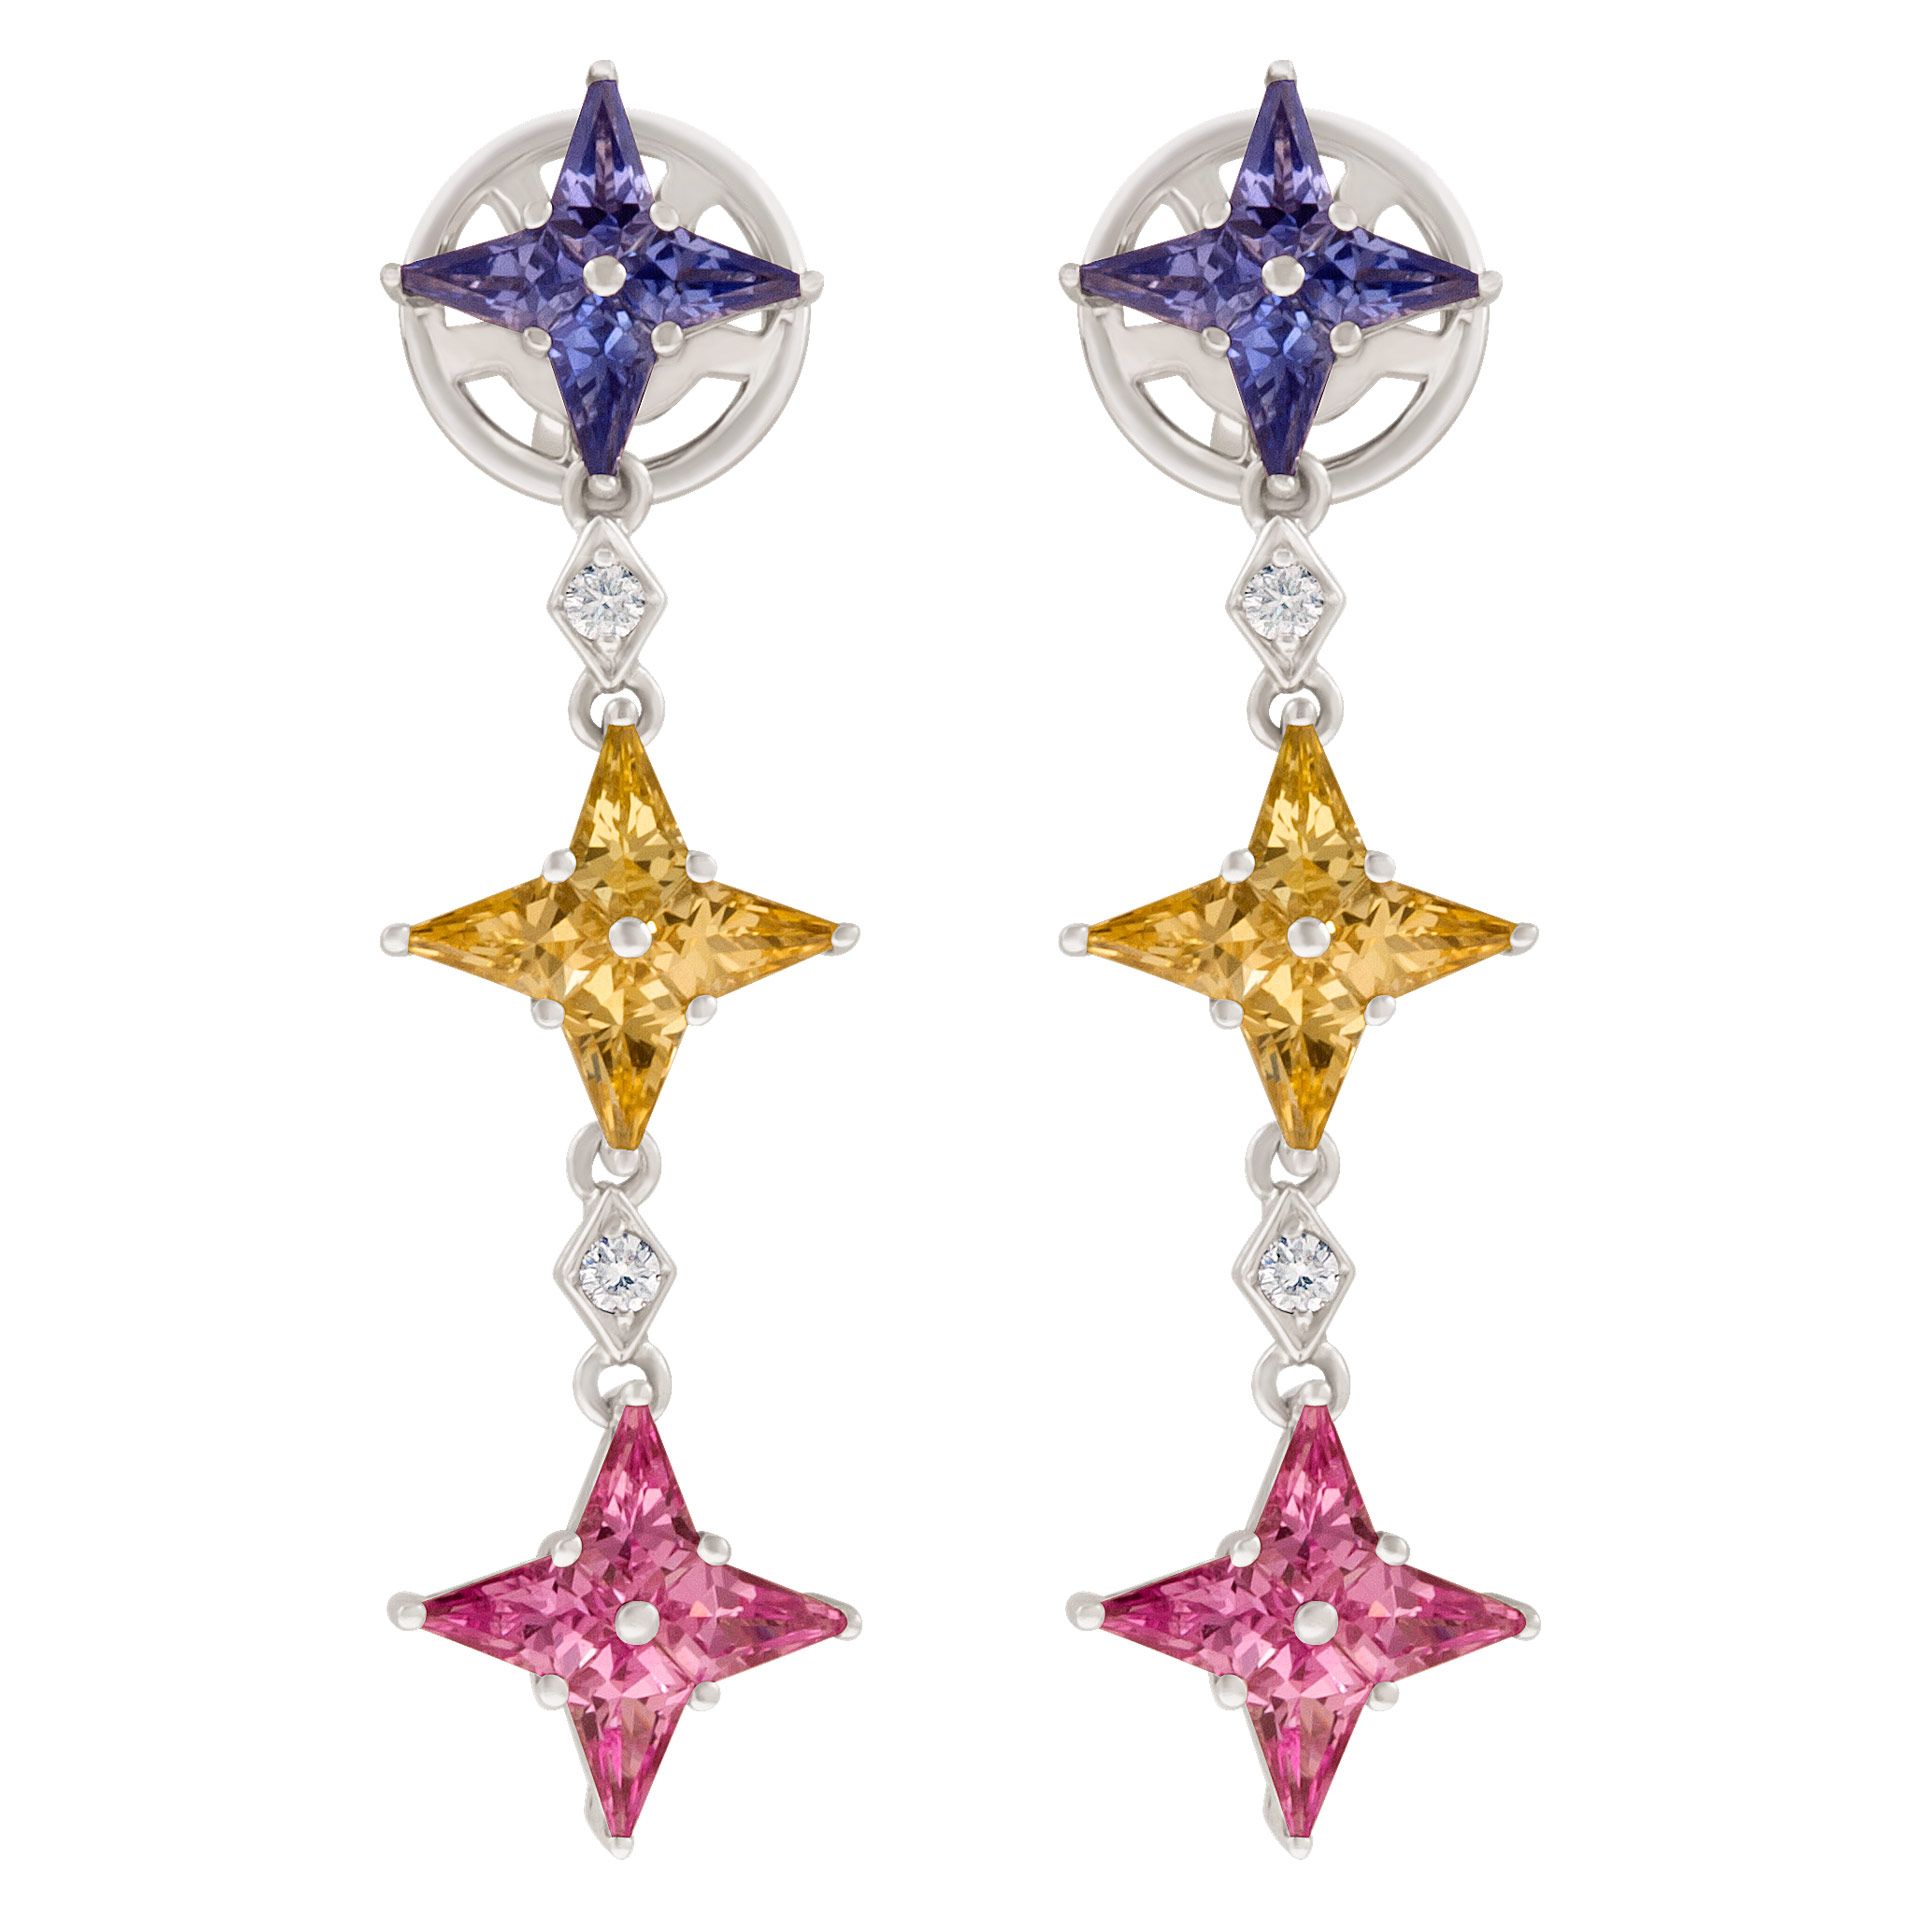 Multi Sapphire earrings in 18k white gold with diamond accents